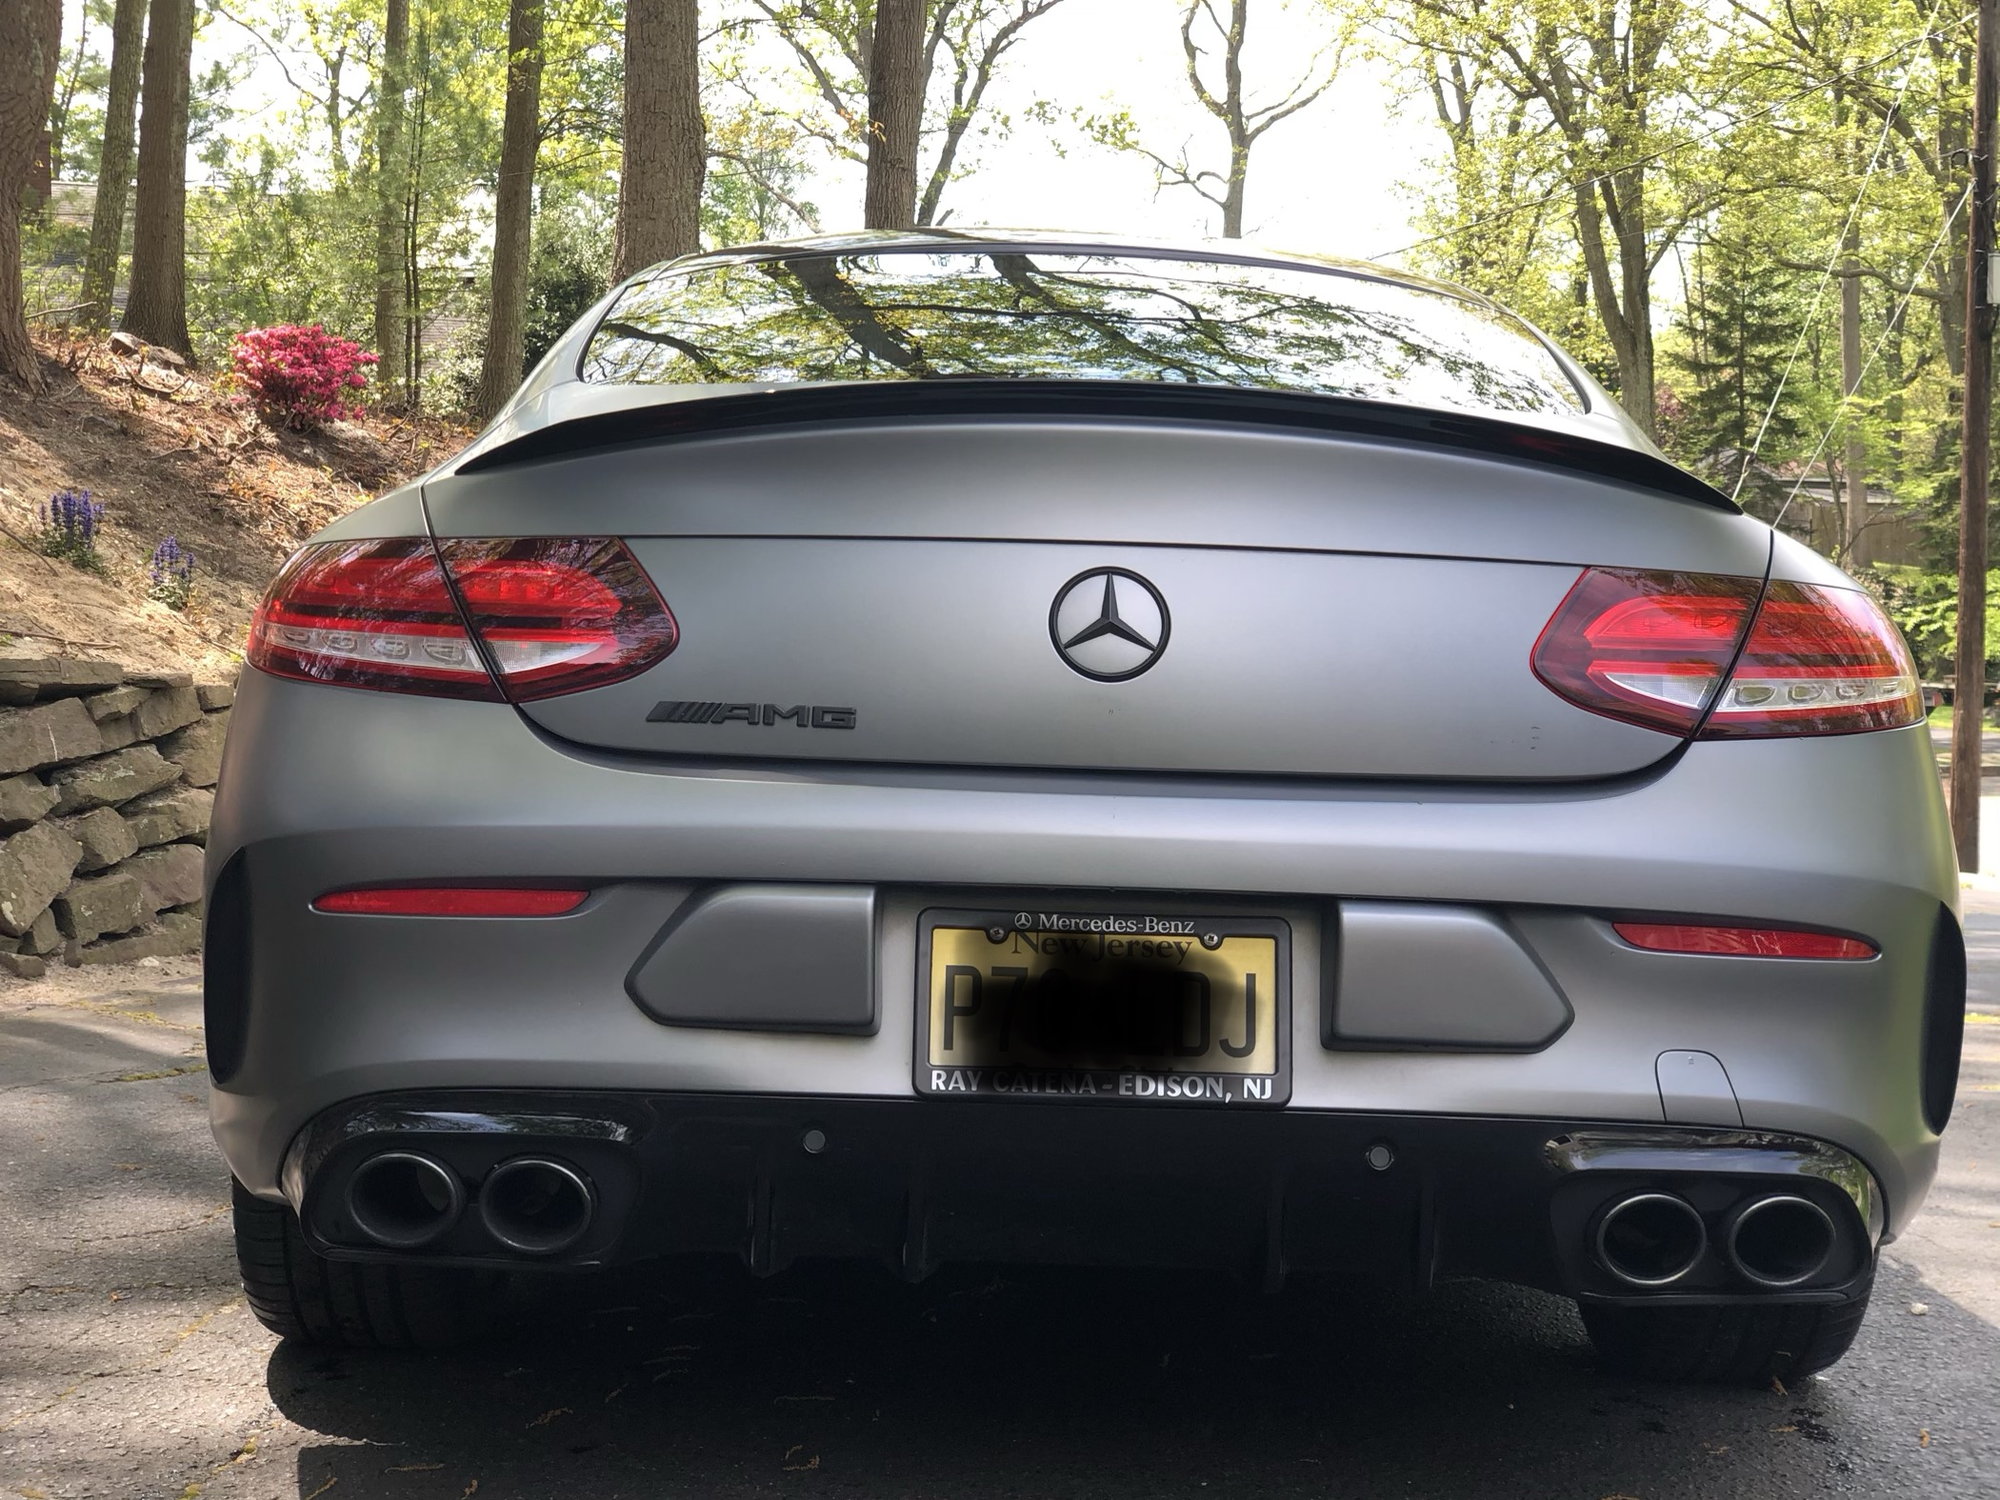 2019 Mercedes-Benz C43 AMG - Factory matte gray c43 - Used - VIN Wddwj6eb7kf869379 - 7,200 Miles - 6 cyl - AWD - Automatic - Coupe - Gray - Ocean, NJ 07712, United States